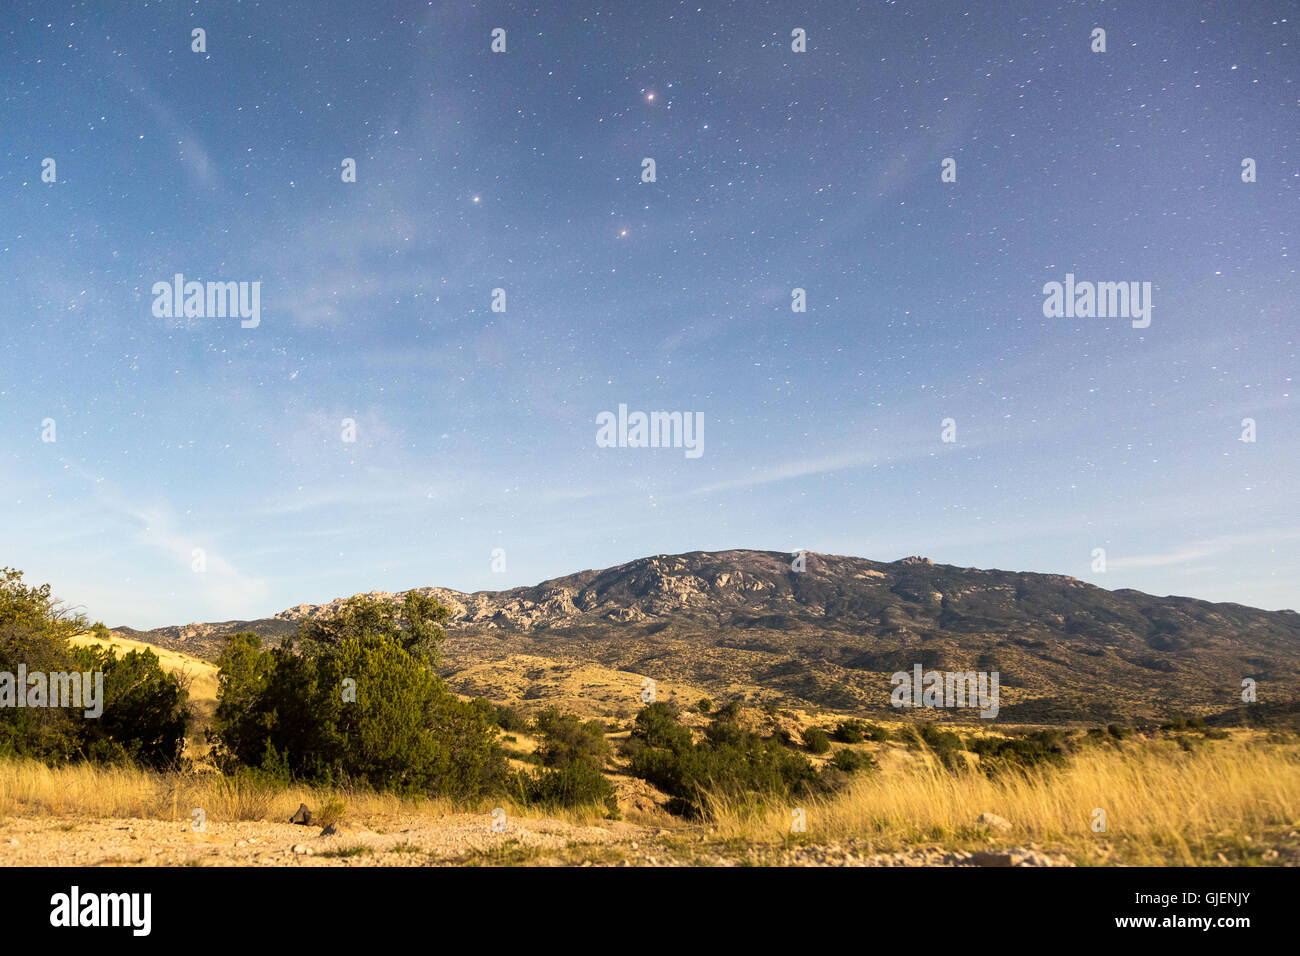 A starry night sky over Mica Mountain and Sonoran Desert grasslands lit by moonlight. Coronado National Forest, Arizona Stock Photo